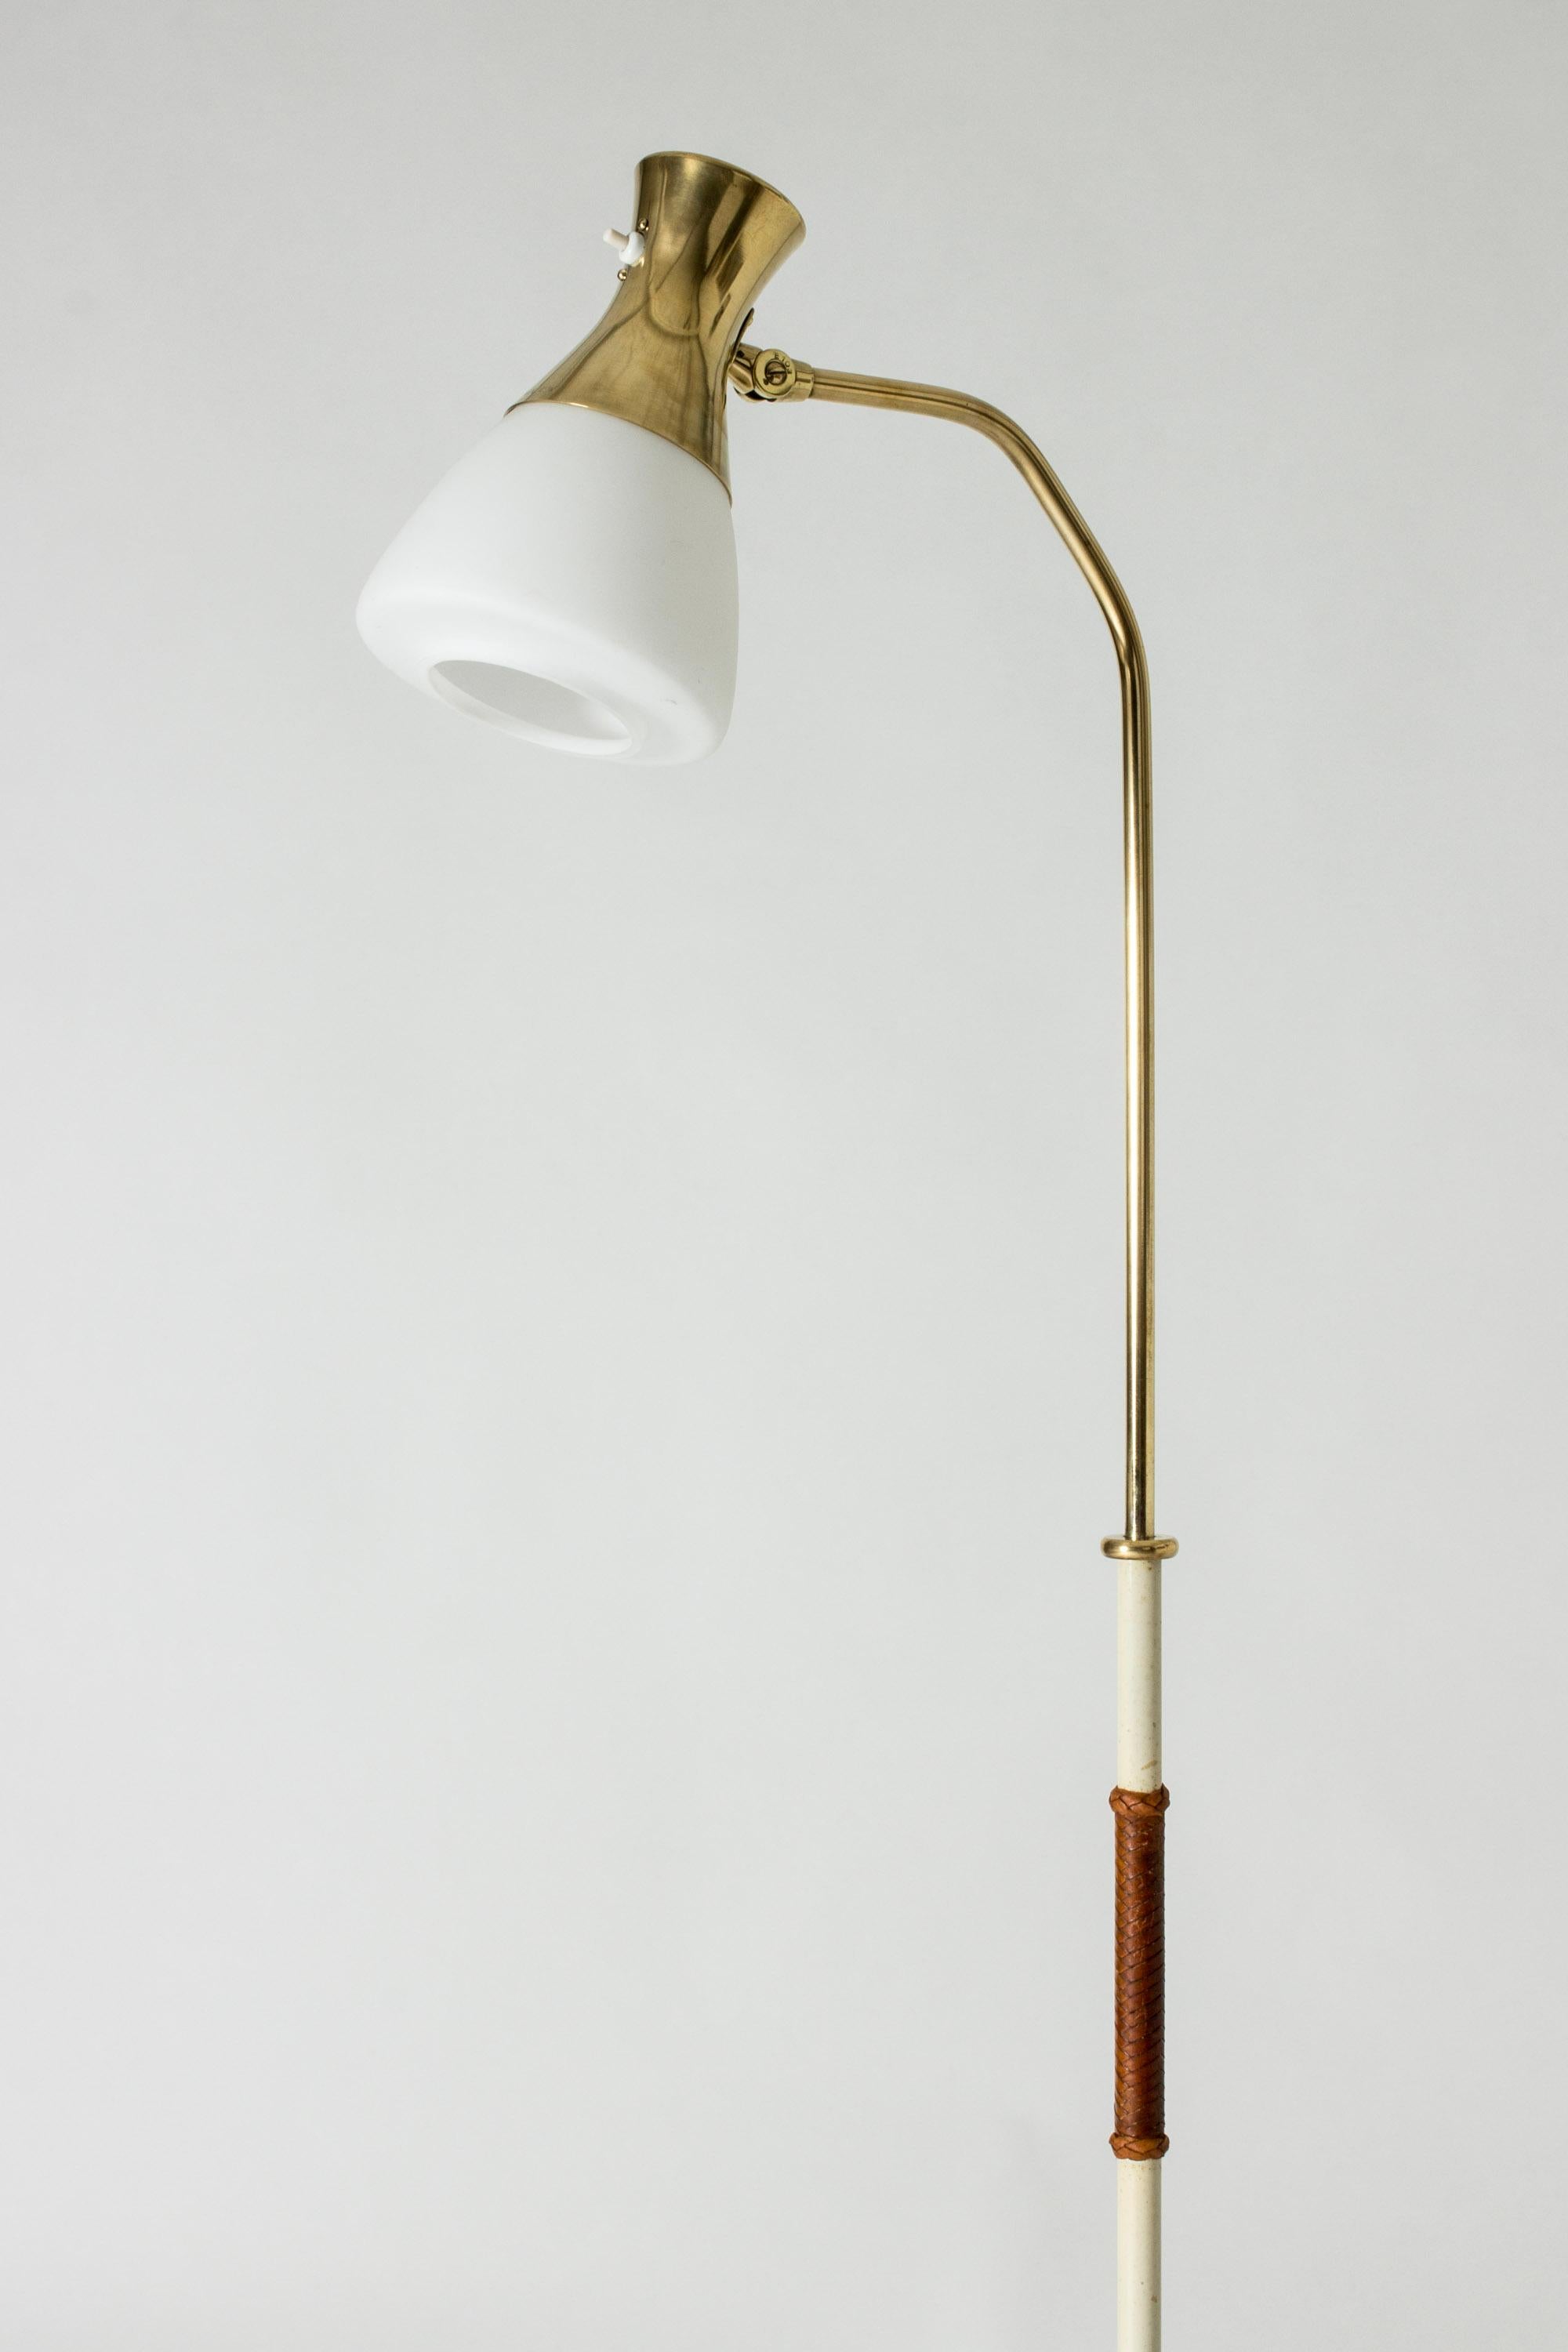 Neat Swedish Modernist brass floor lamp, with a flexible neck and adjustable height.